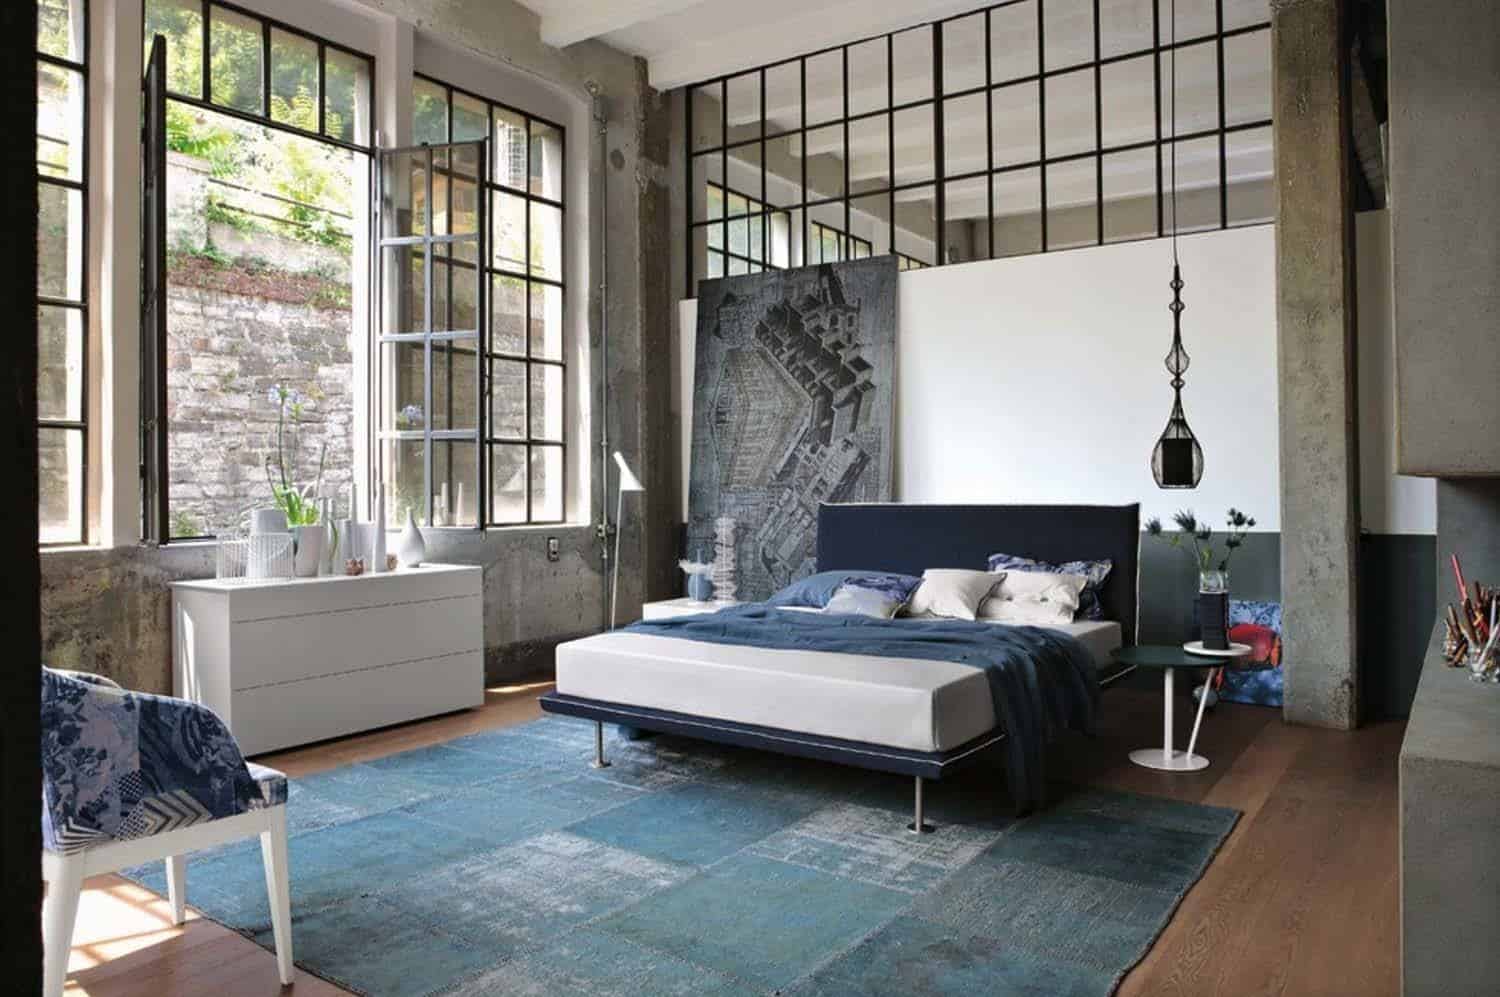 35 Edgy industrial style bedrooms creating a statement